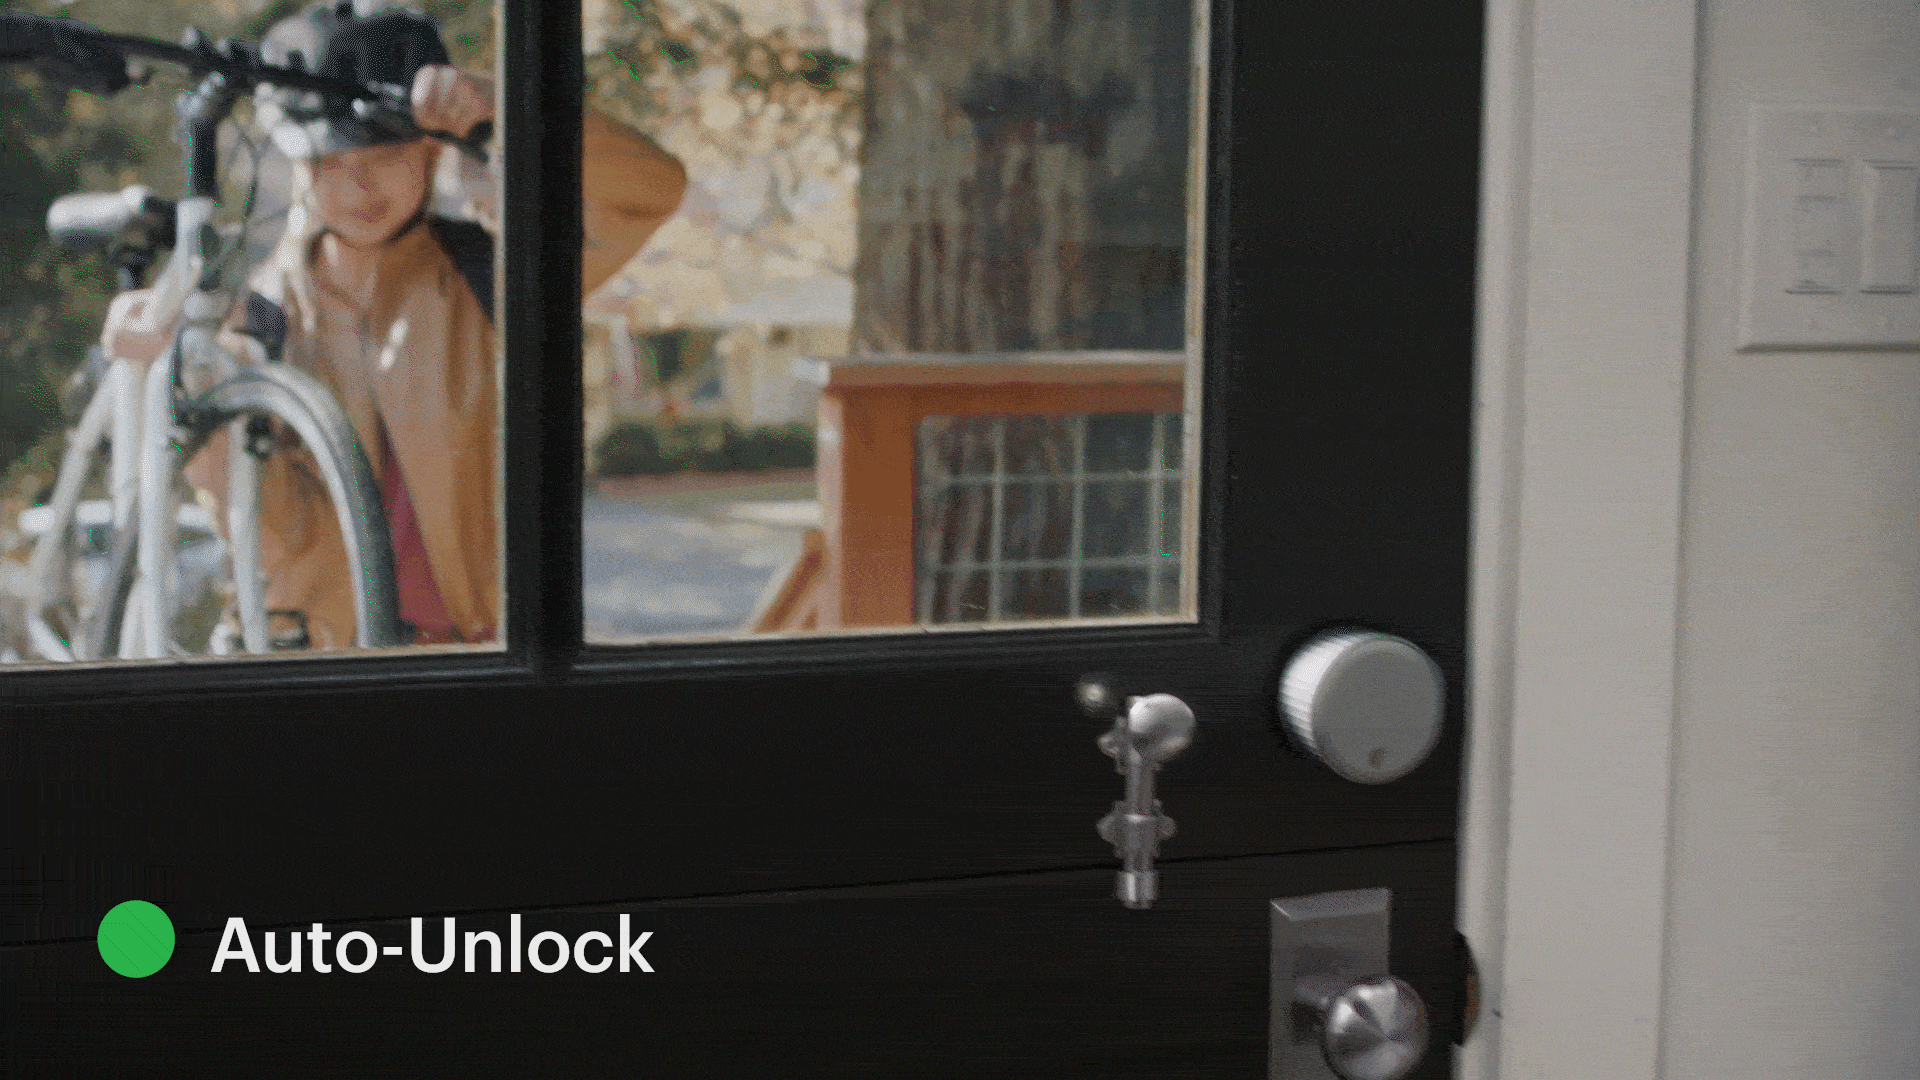 arriving home to auto-unlock